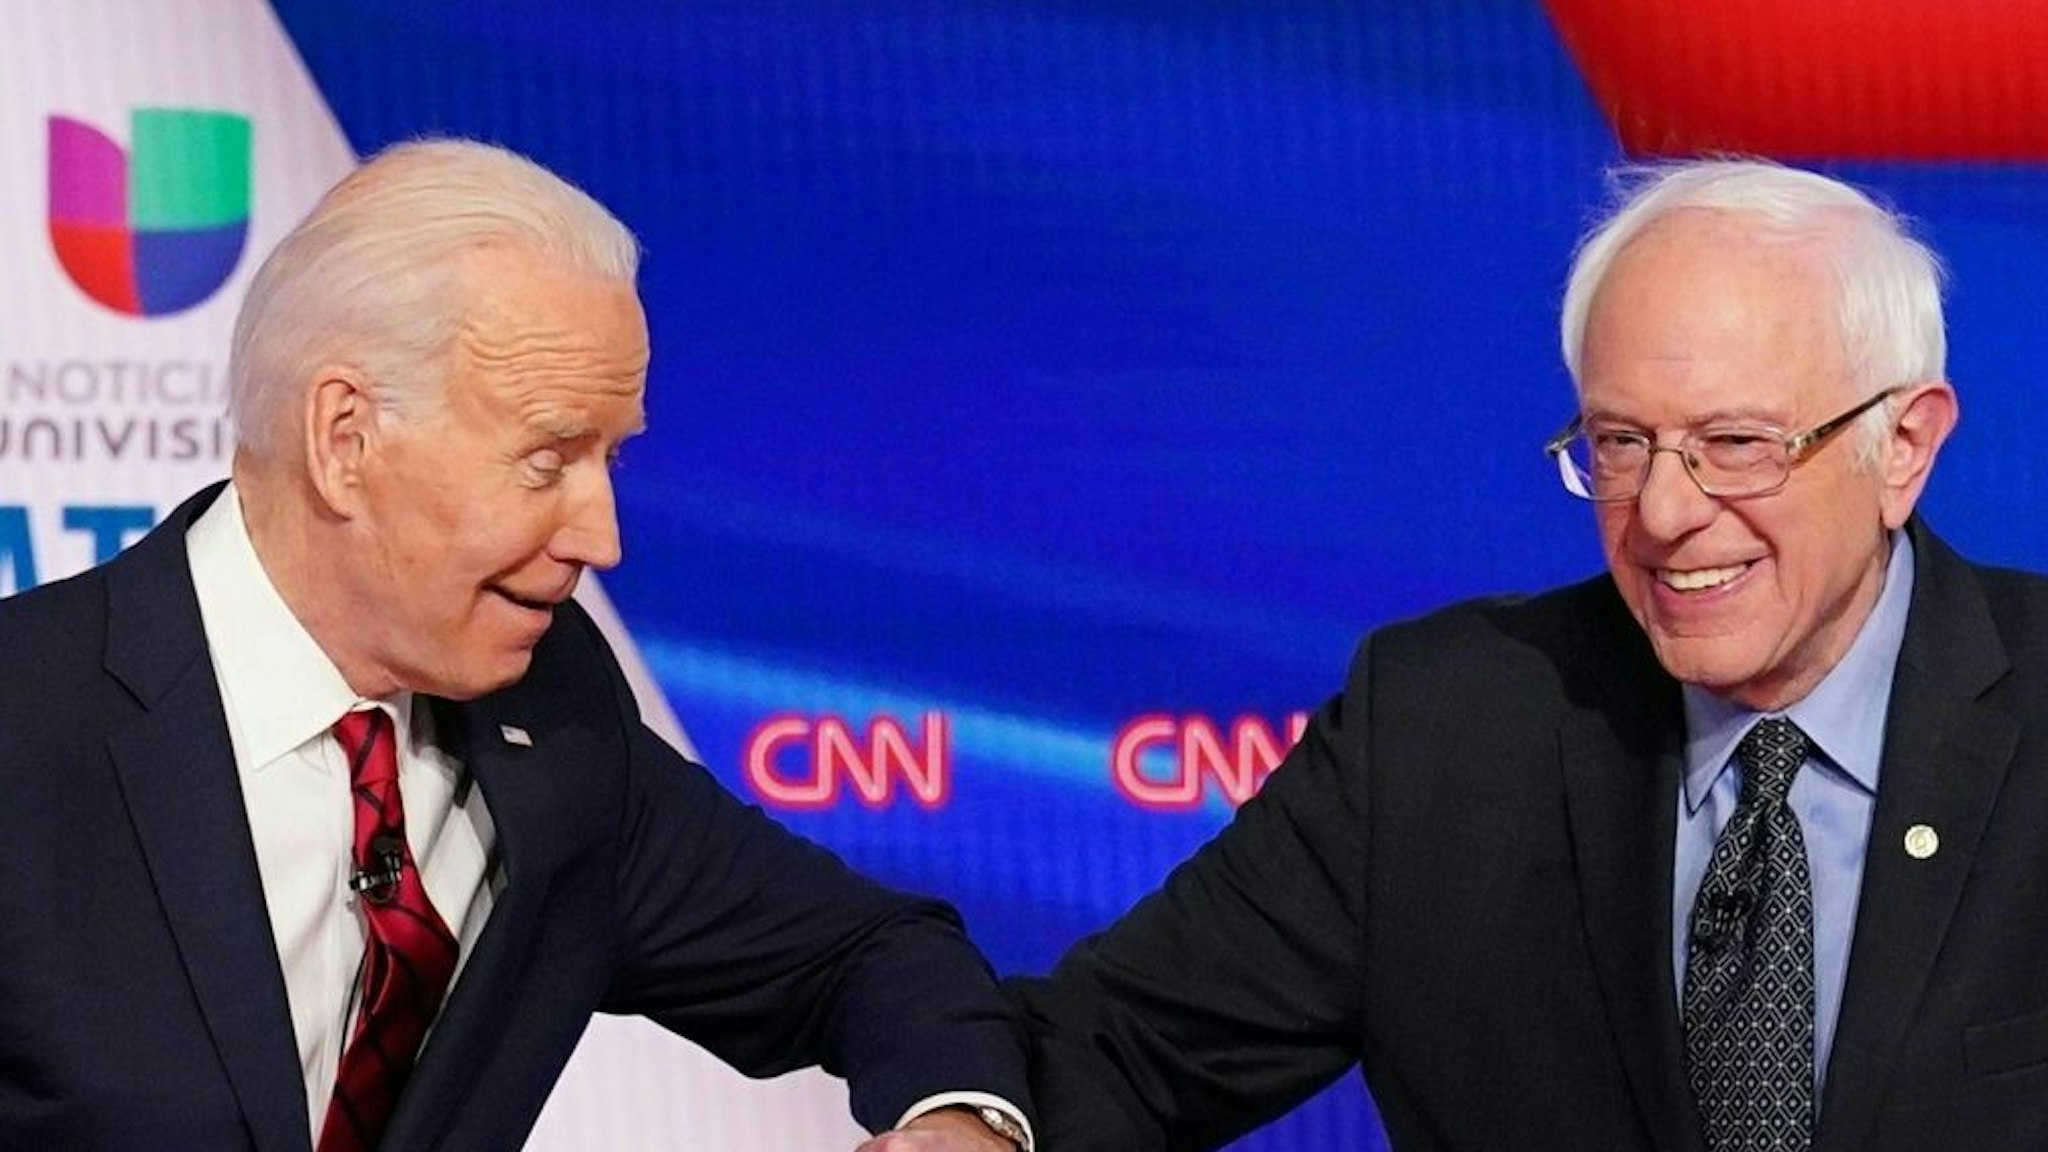 TOPSHOT - Democratic presidential hopefuls former US vice president Joe Biden (L) and Senator Bernie Sanders greet each other with a safe elbow bump before the start of the 11th Democratic Party 2020 presidential debate in a CNN Washington Bureau studio in Washington, DC on March 15, 2020. (Photo by Mandel NGAN / AFP) (Photo by